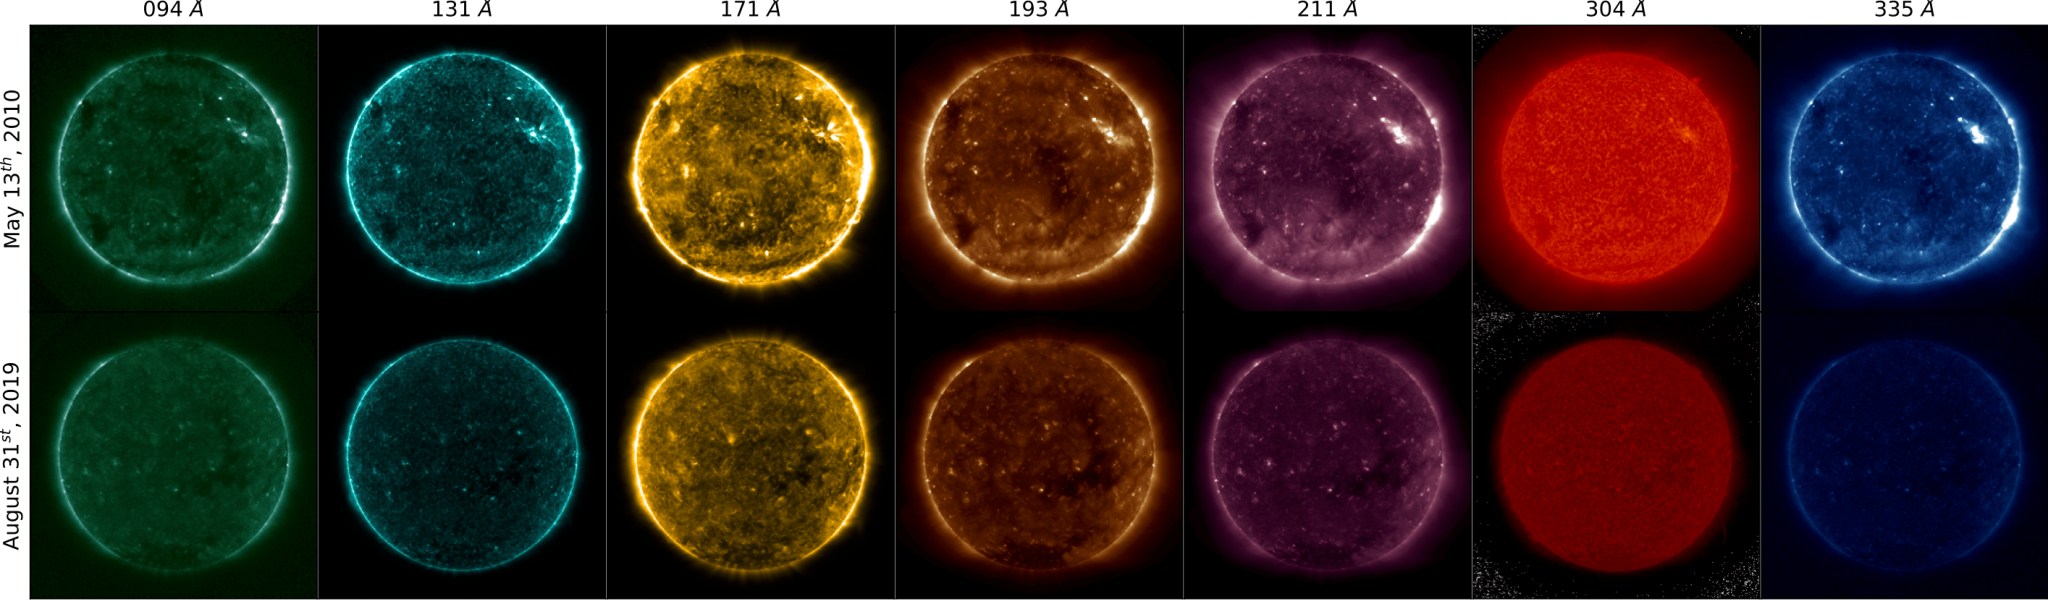 Seven of the ultraviolet wavelengths observed by the AIA on NASA’s SDO. The top row is taken from May 2010 and the bottom row shows from 2019, without any corrections, showing how the instrument degraded over time.